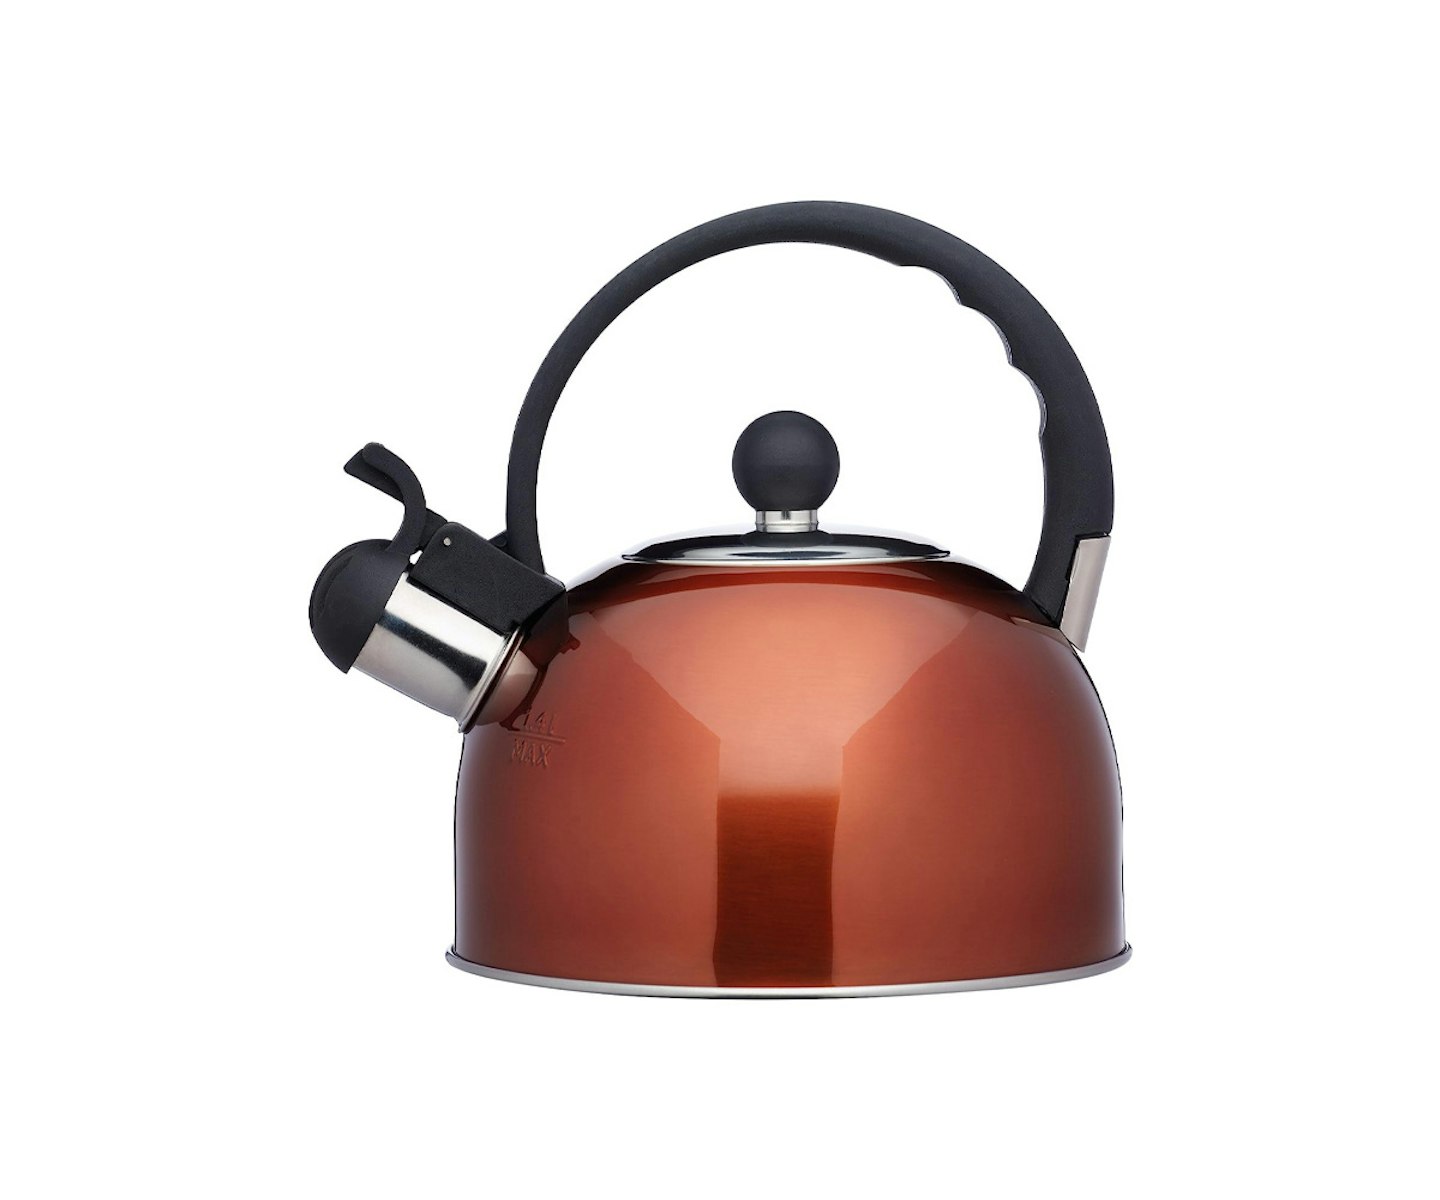 KitchenCraft Le'Xpress Induction Safe Whistling Stovetop Kettle